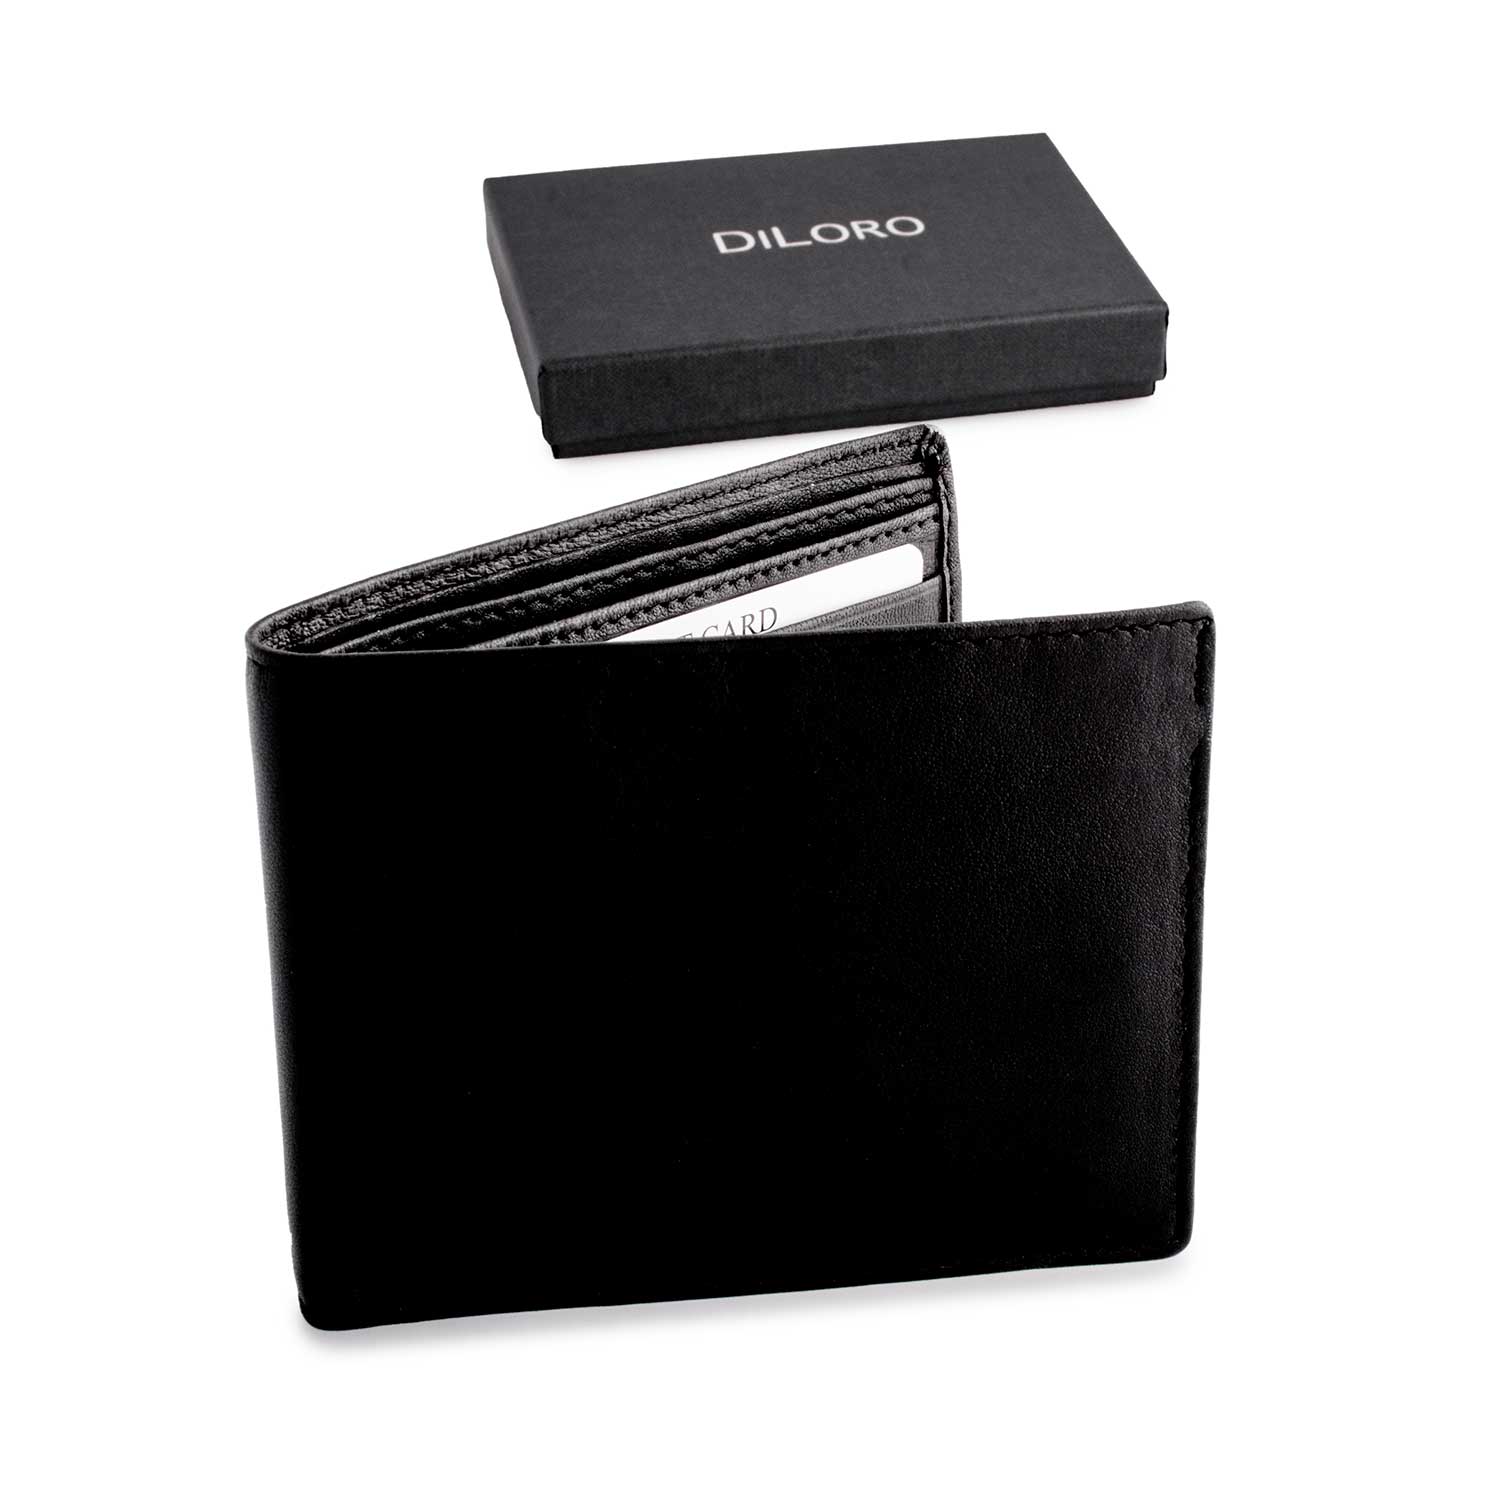 Leather Wallets from Men and Women - DiLoro Leather - Swiss Design